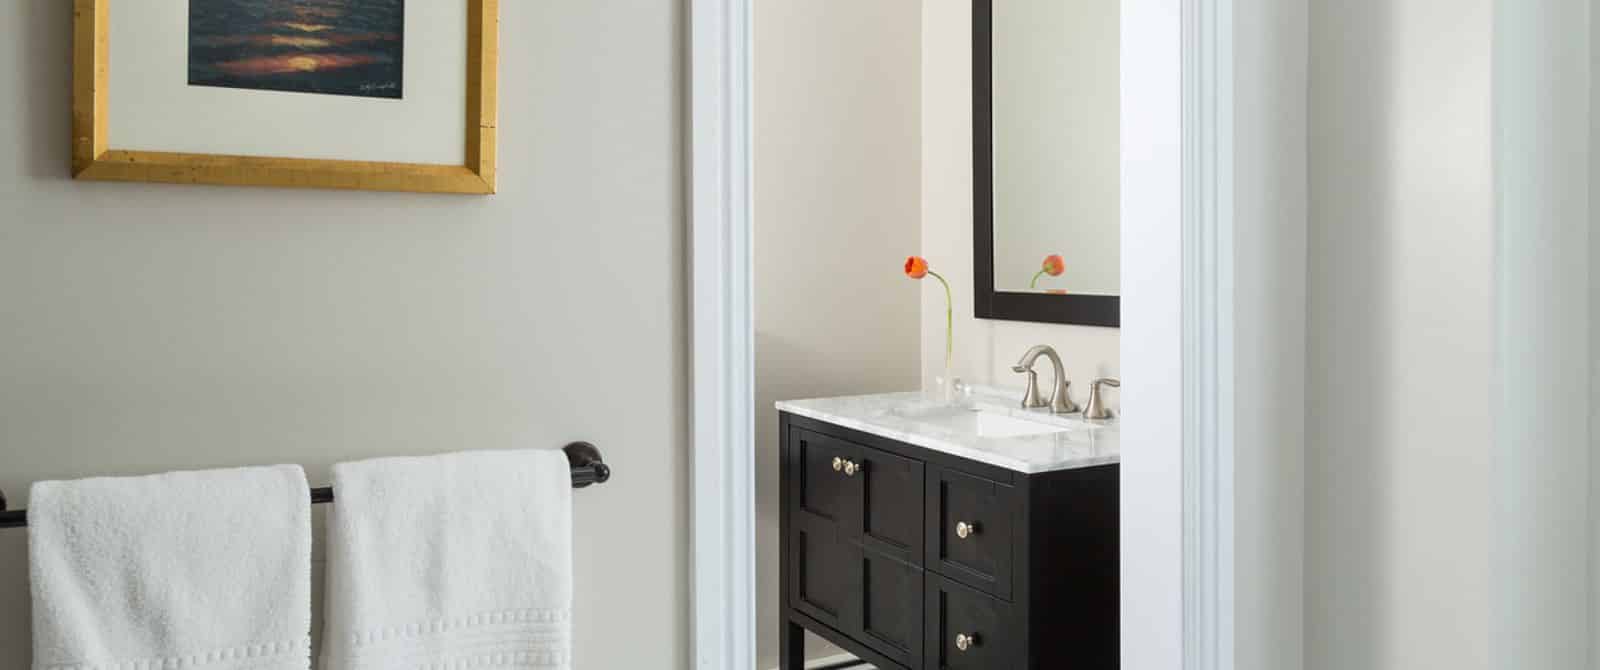 View into bathroom with dark wooden vanity, marble top, and large framed mirror